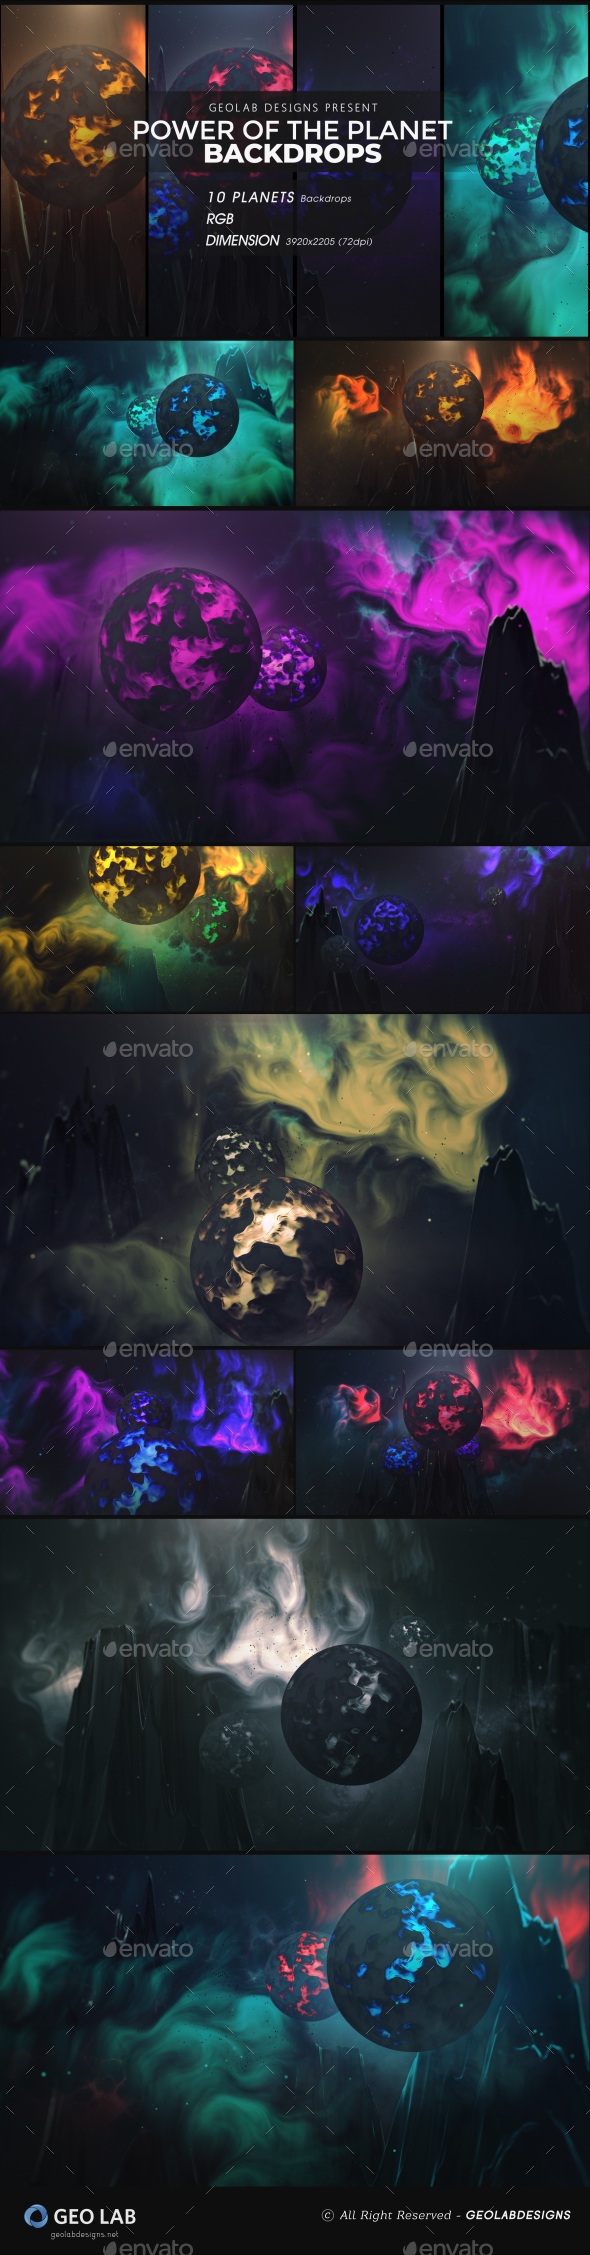 [DOWNLOAD]Power Of The Planet Backdrops l Dark Side Planet Backdrops